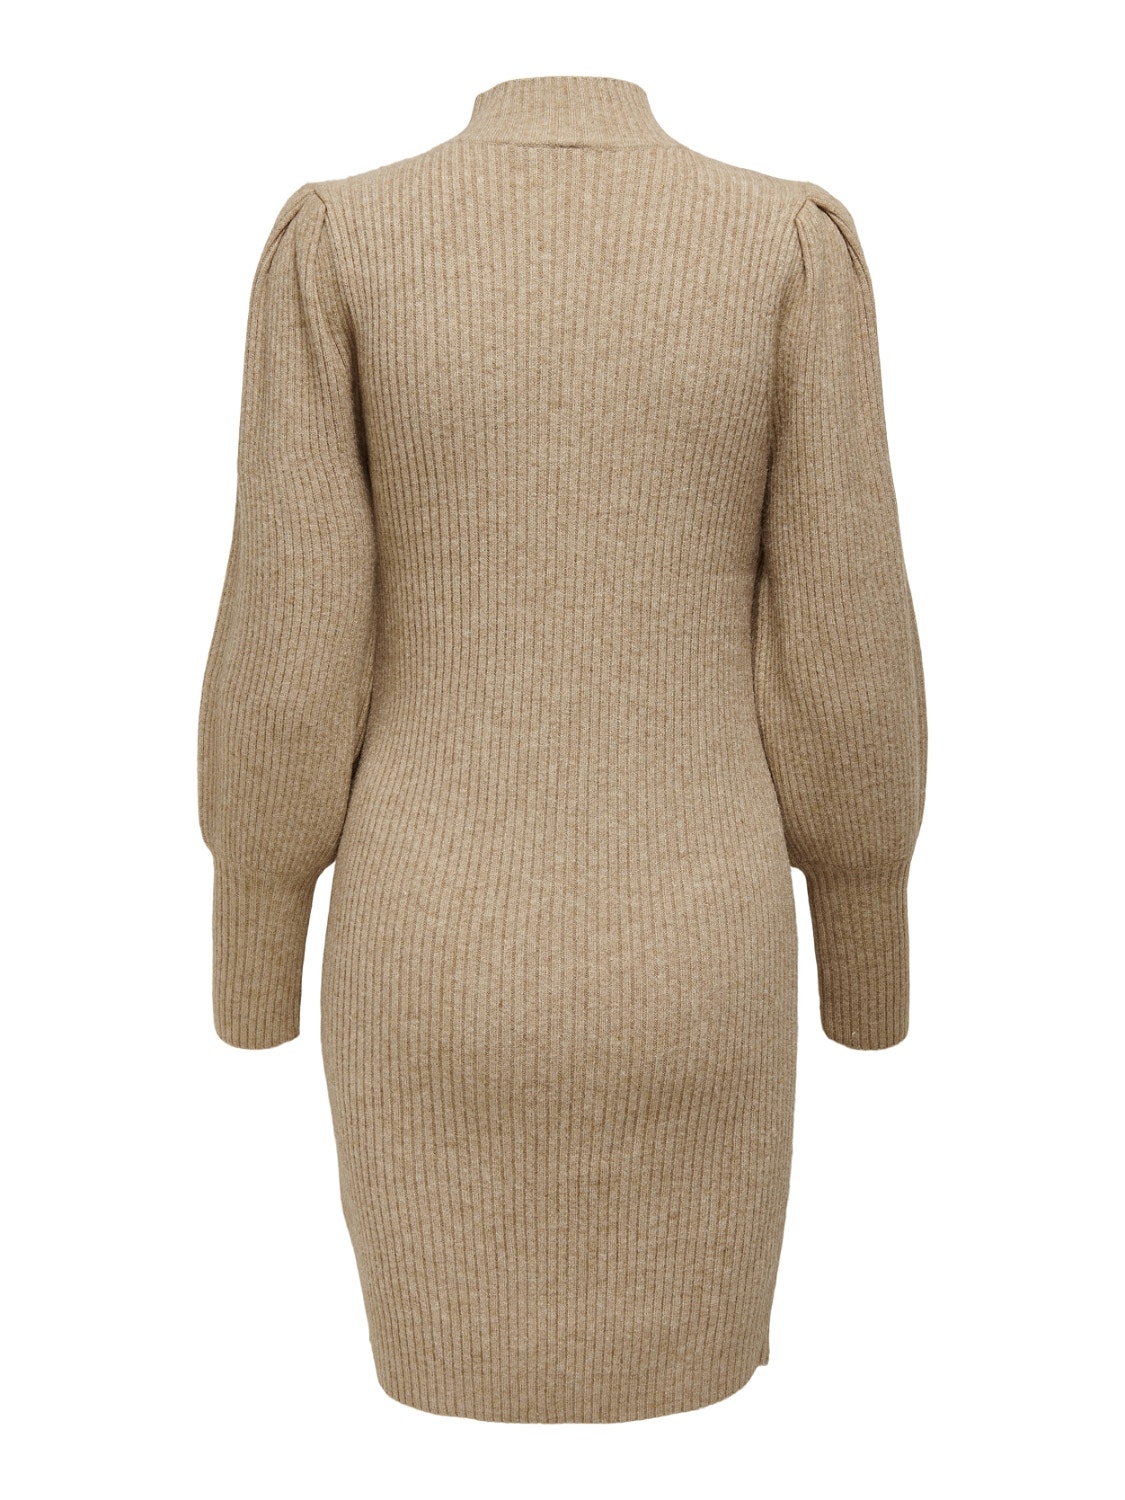 ONLY Mama rib Knitted Dress -Toasted Coconut - 15245434